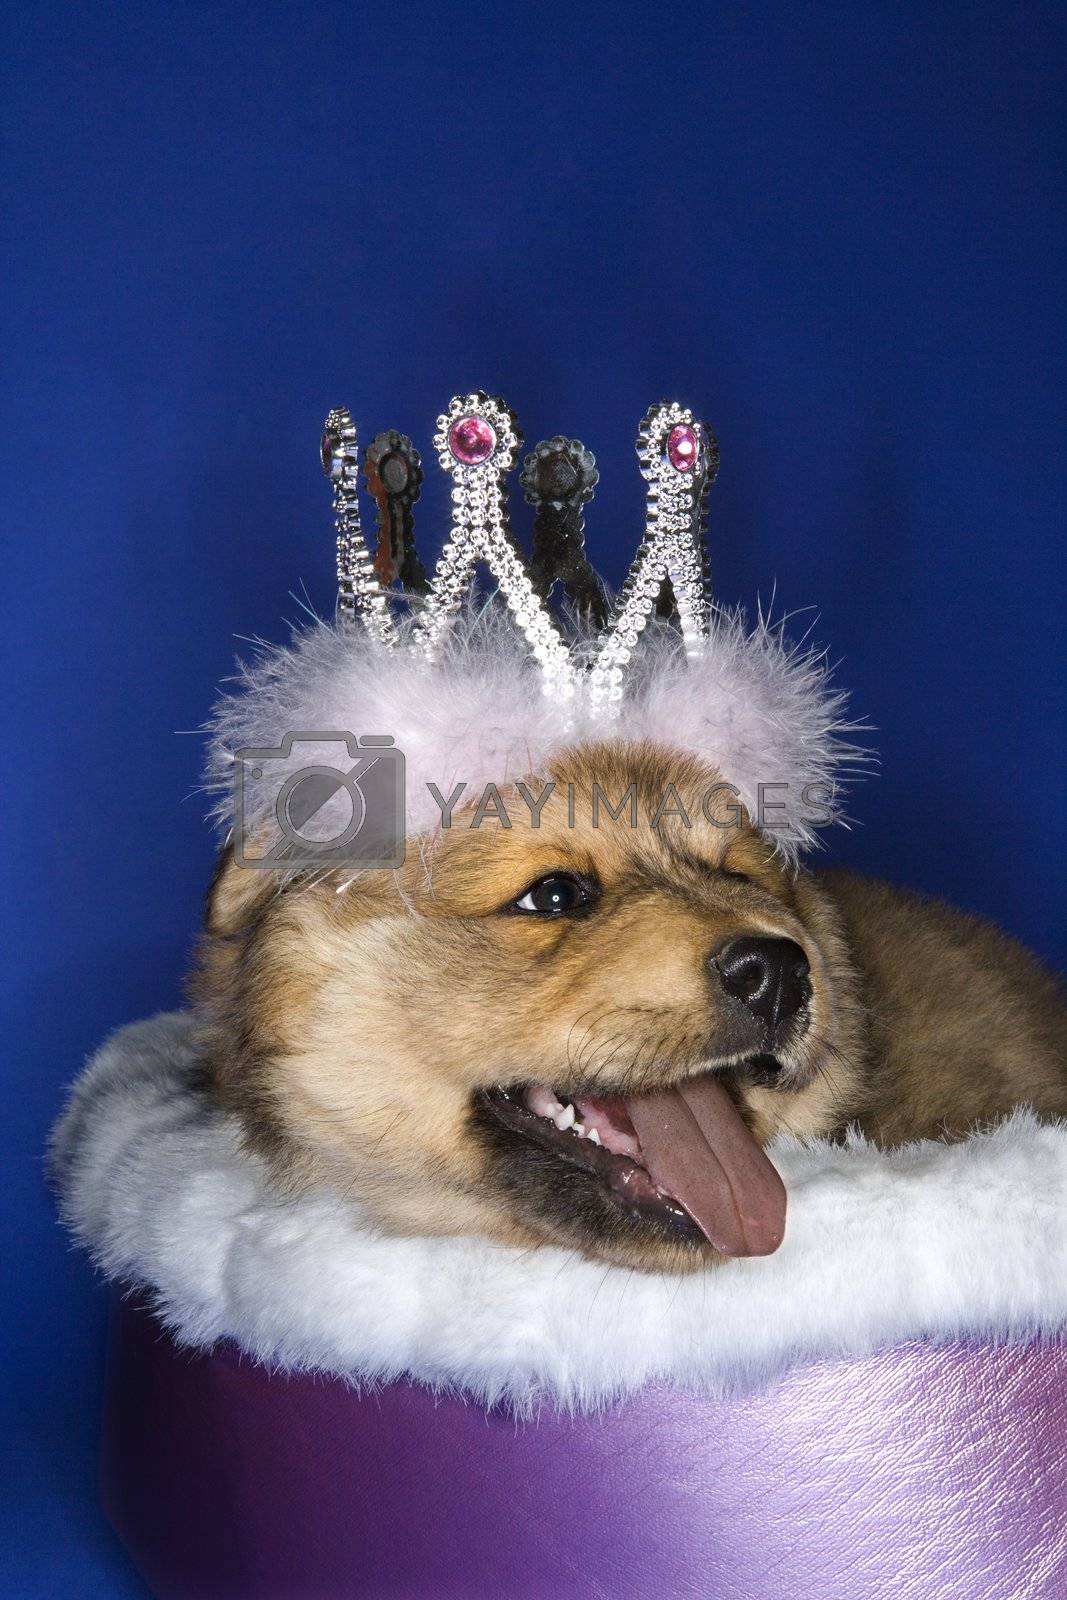 Royalty free image of Puppy wearing crown. by iofoto